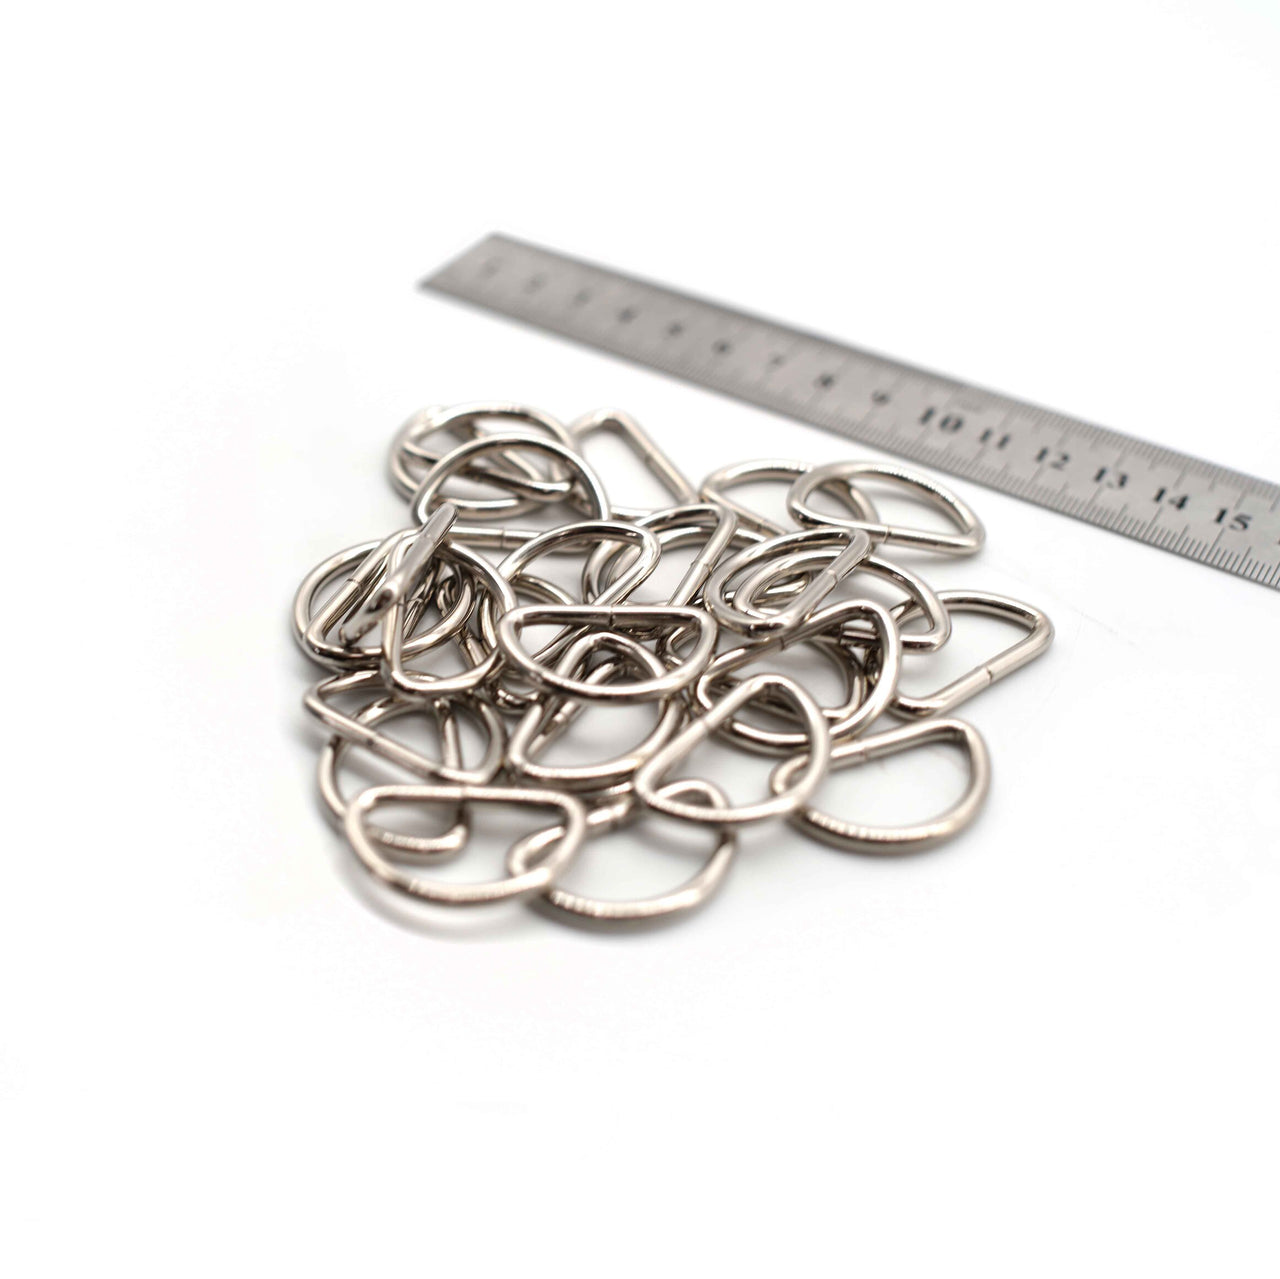 D Rings - 31mm - Silver - Pack of 12